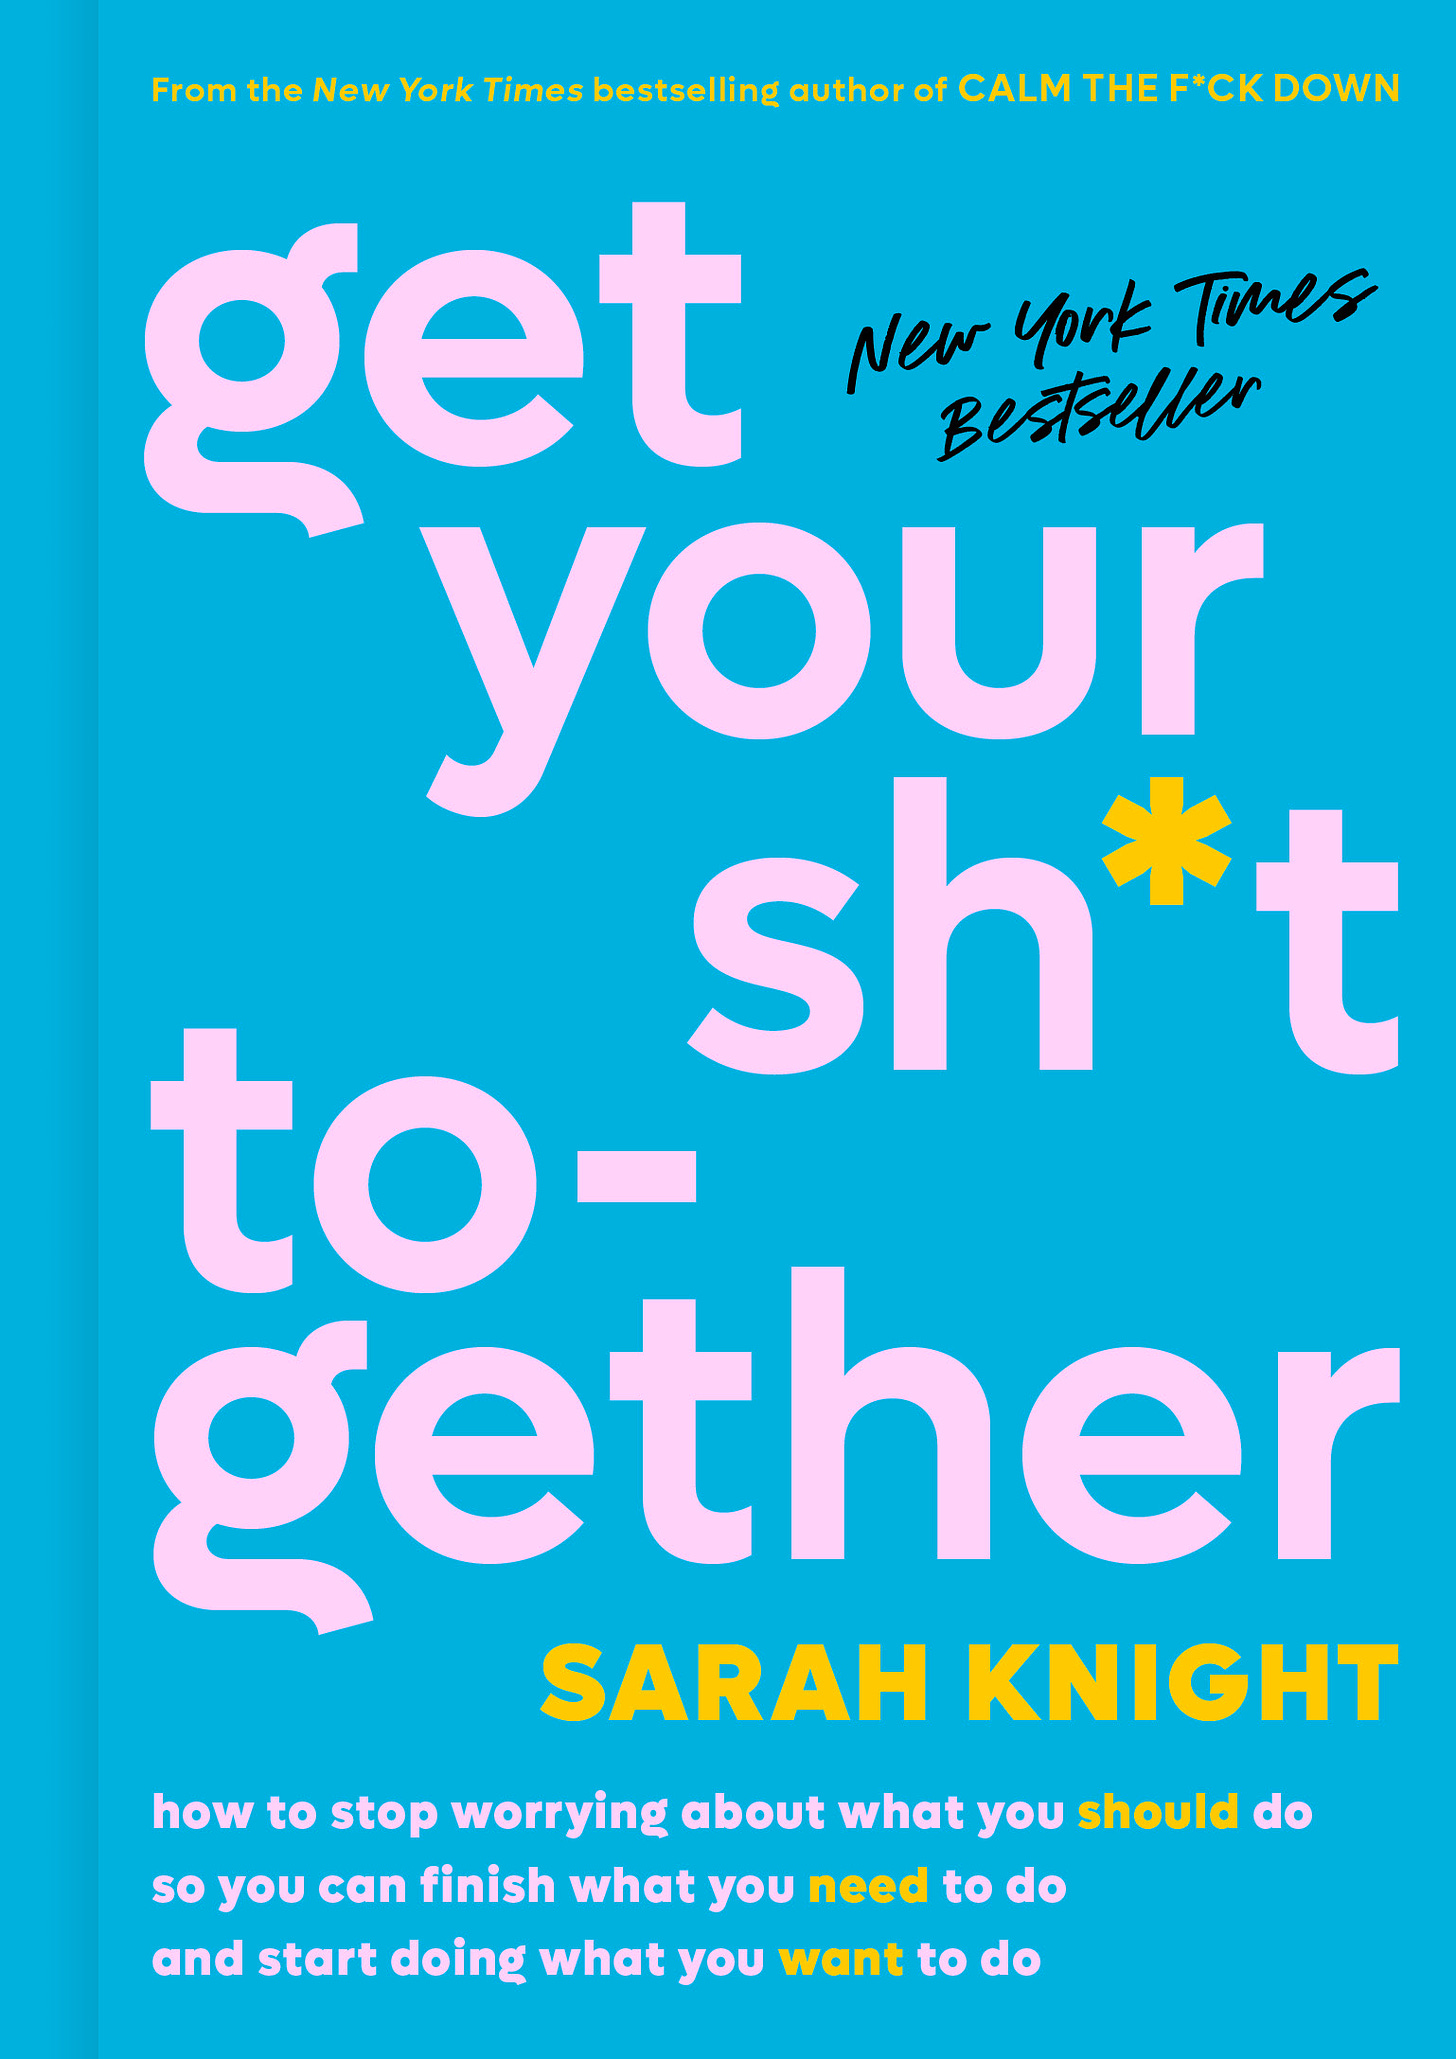 The cover of Get Your Shit Together, which is bright blue with pink and yellow text